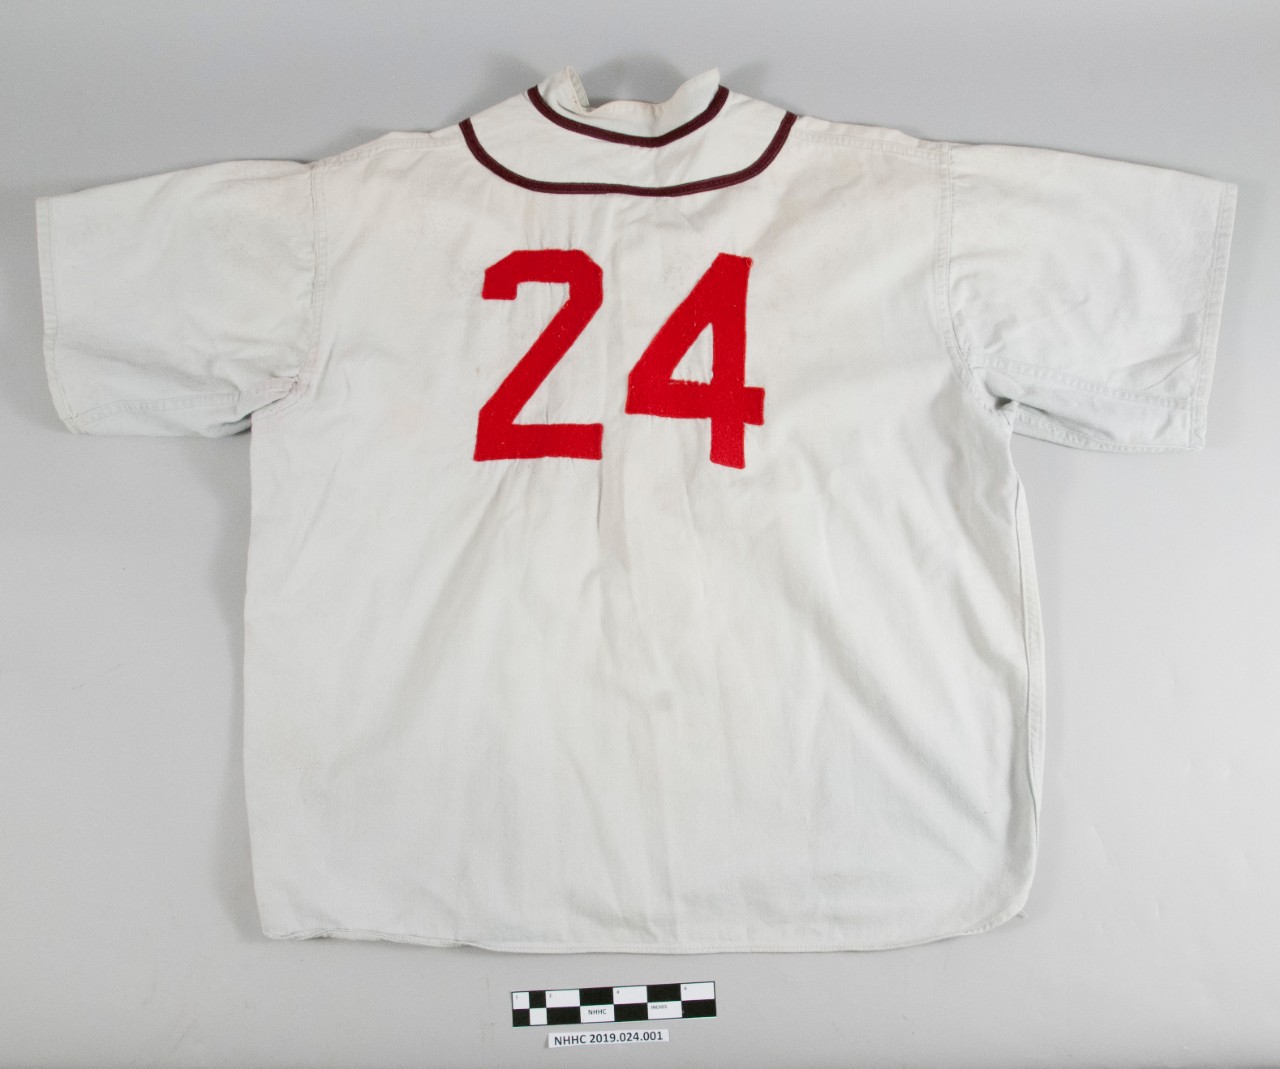 <p>Reverse view of the&nbsp;baseball uniform blouse.&nbsp;Off-white in color with red lettering 24.&nbsp;Two brown stripes around the collar.</p>
